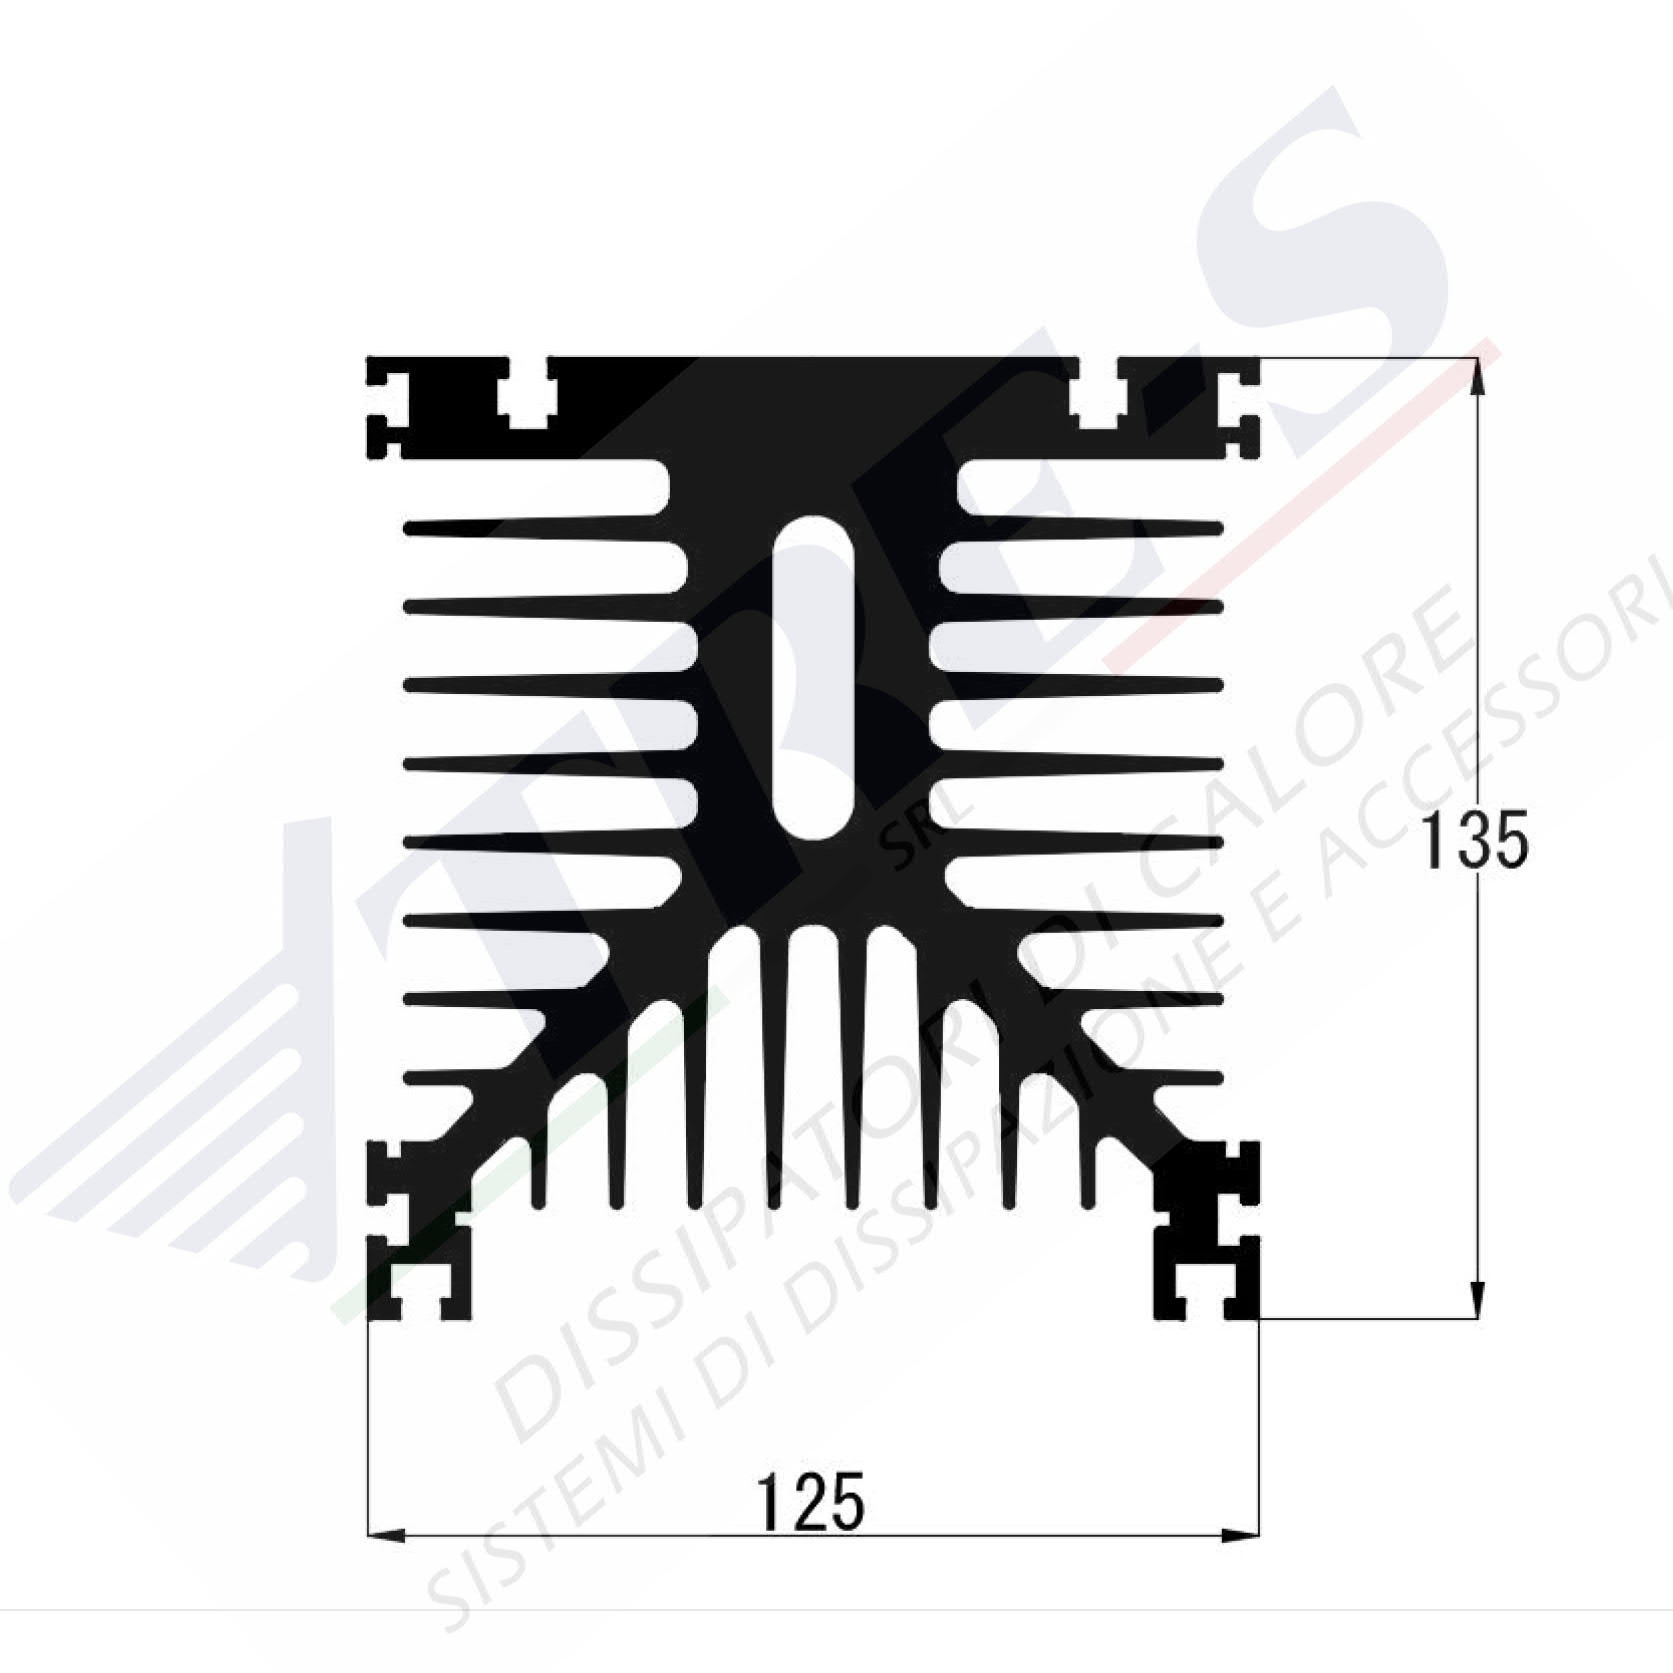 PRO1122 - Profiles for devices with screw connections